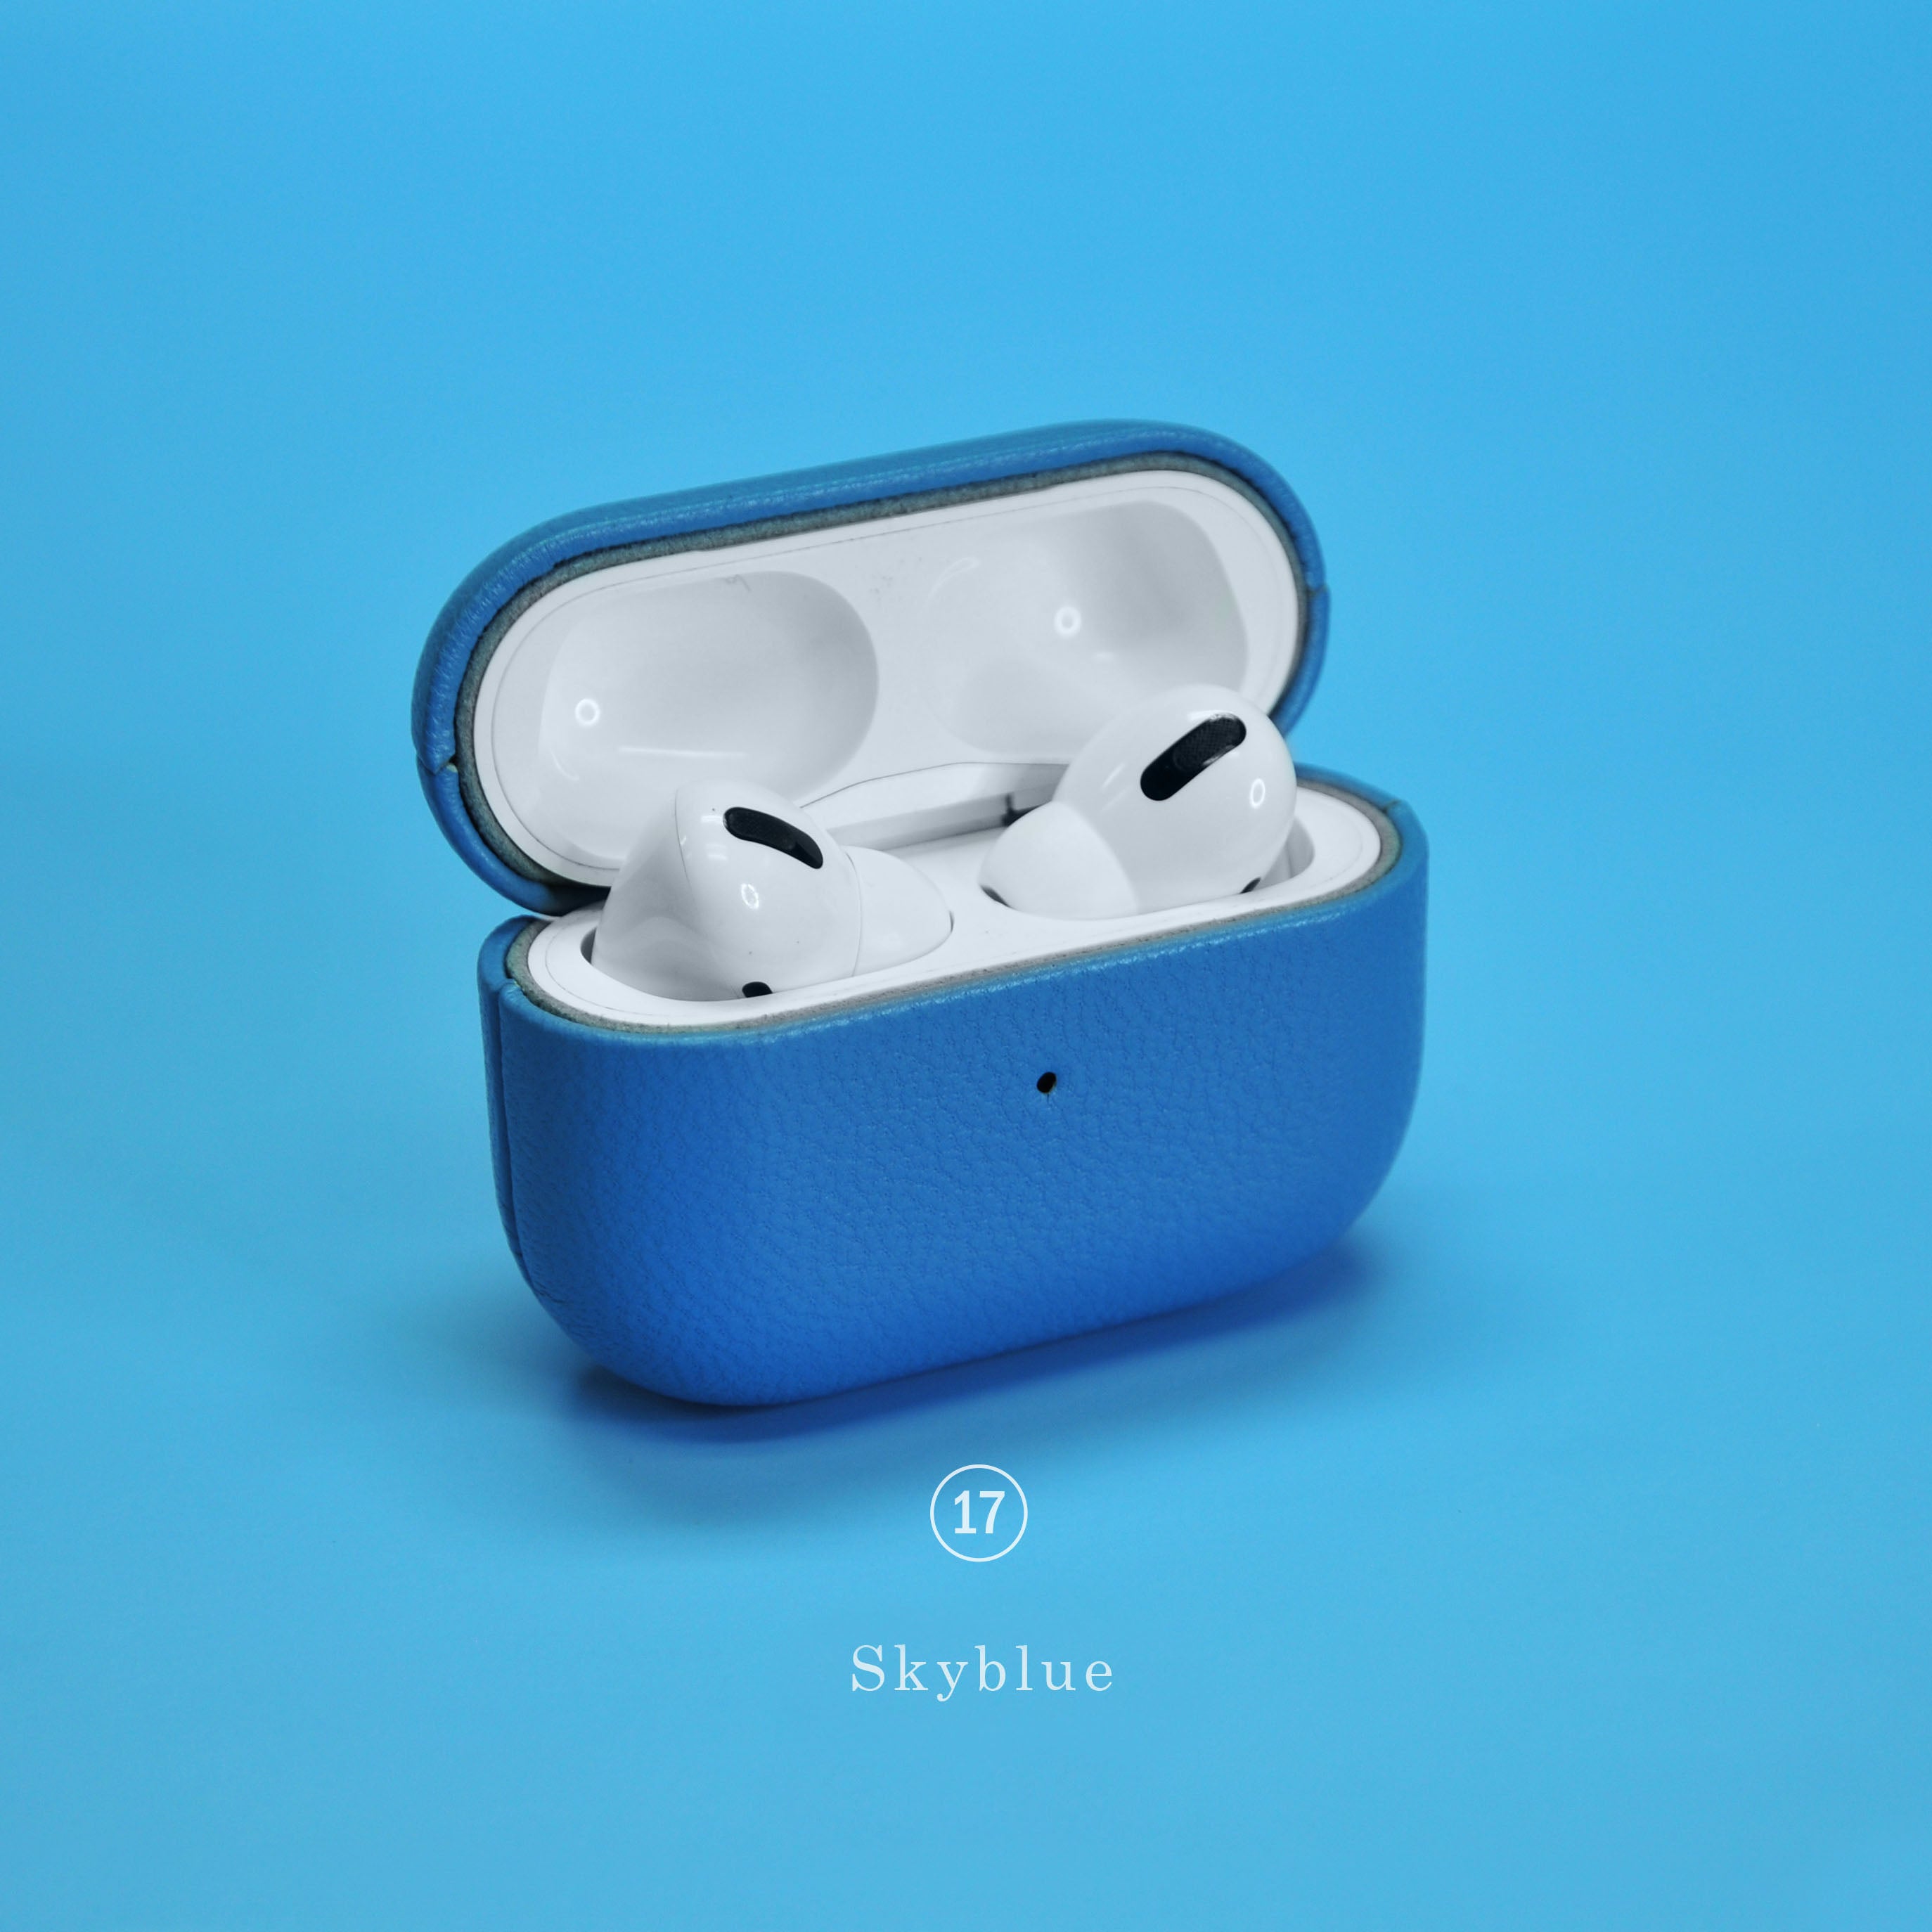 Skyblue Leather AirPod Case